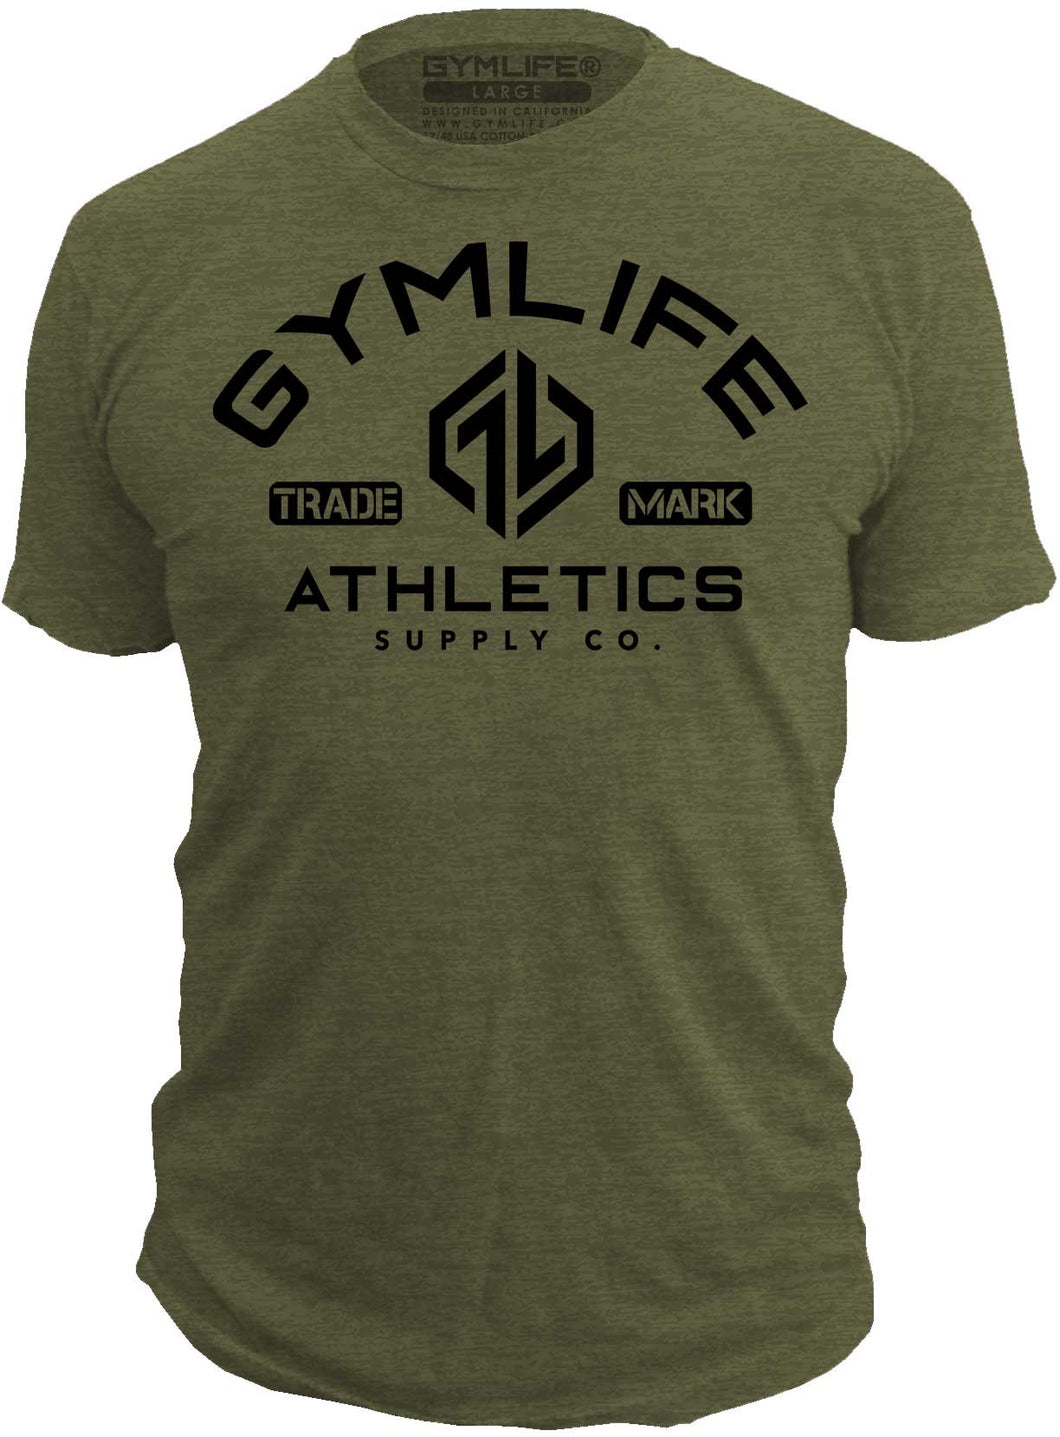 GYM LIFE - Supply Co - Mens Athletic 52/48 Premium T-Shirt, Made of USA, Olive Drab Green